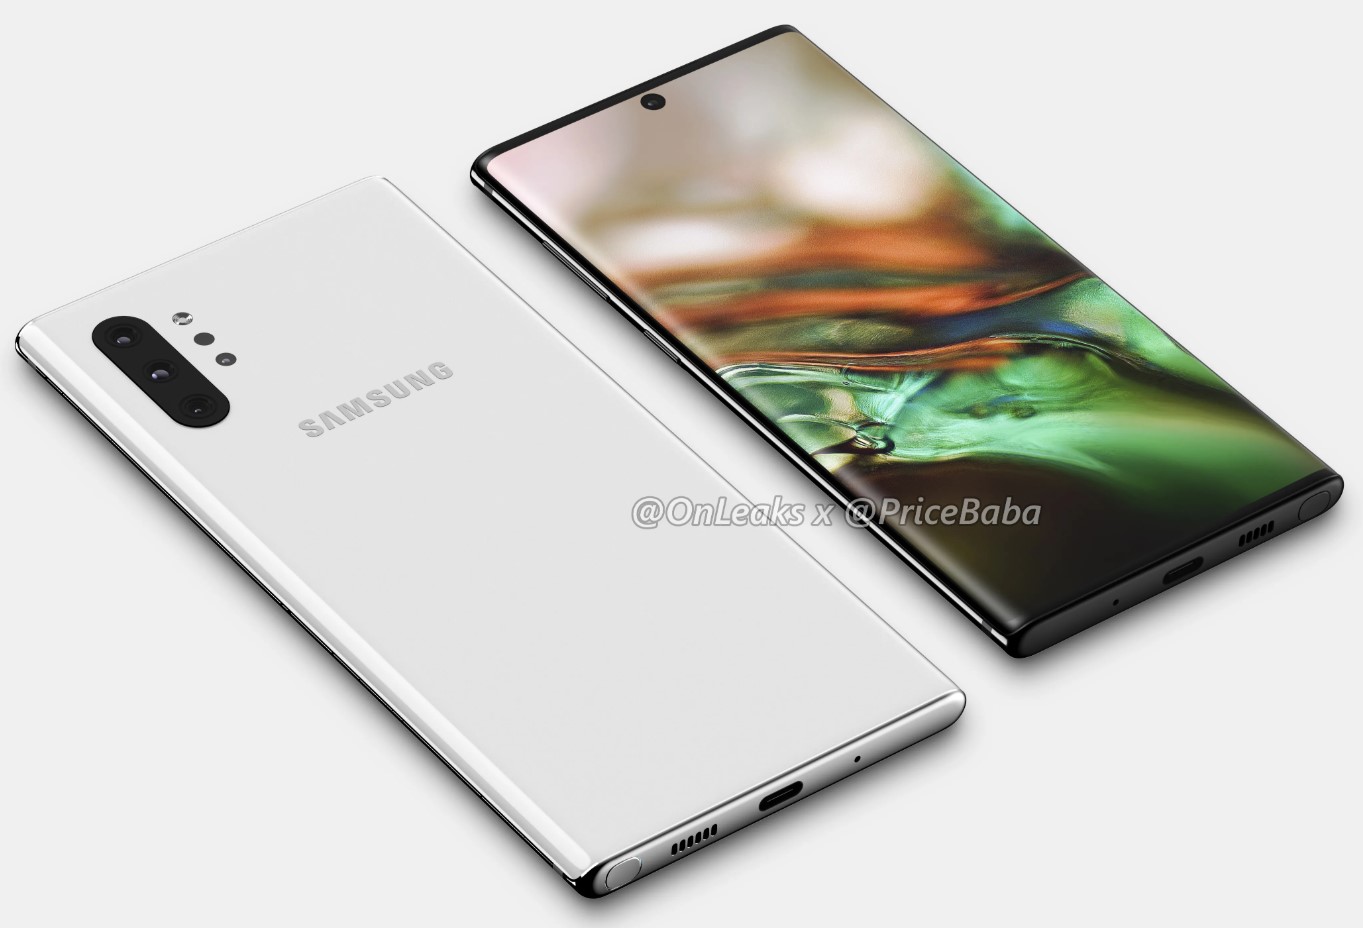 Samsung Galaxy Note 10 Pro’s new renders